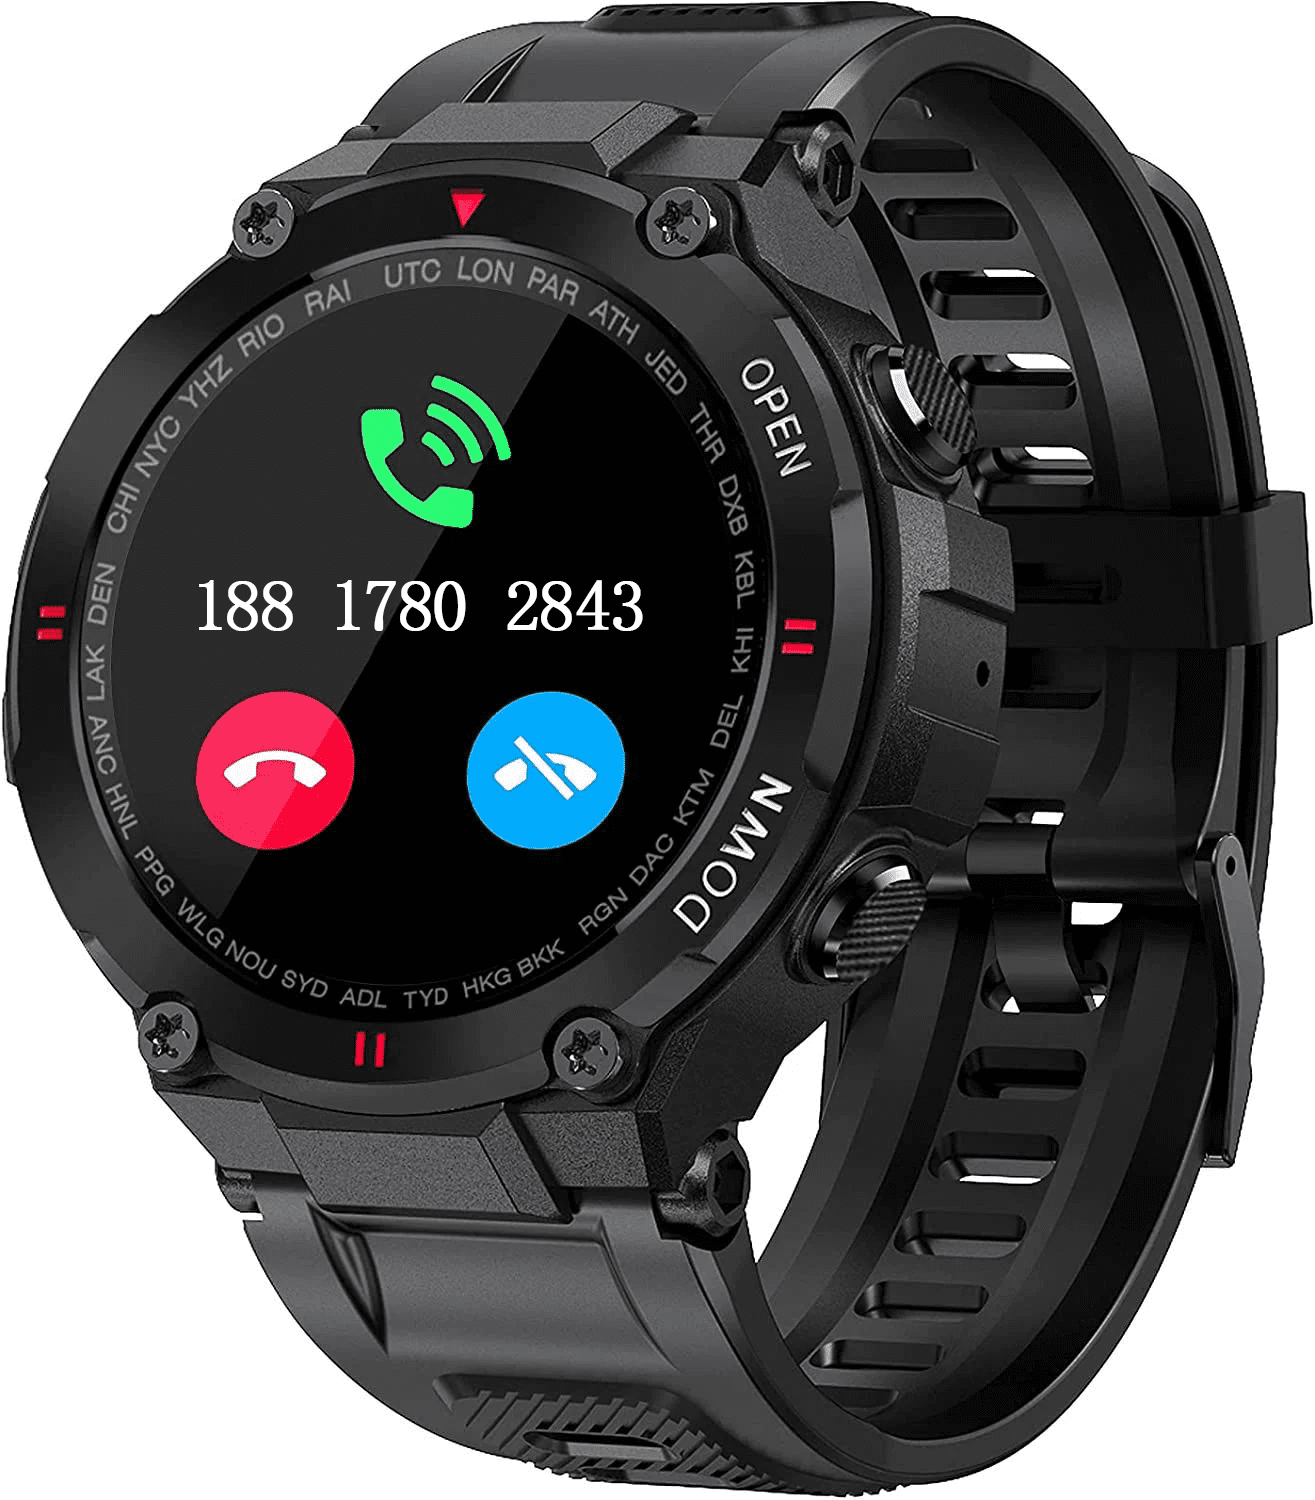 Outdoor Smartwatch for Men with Fitness Tracker